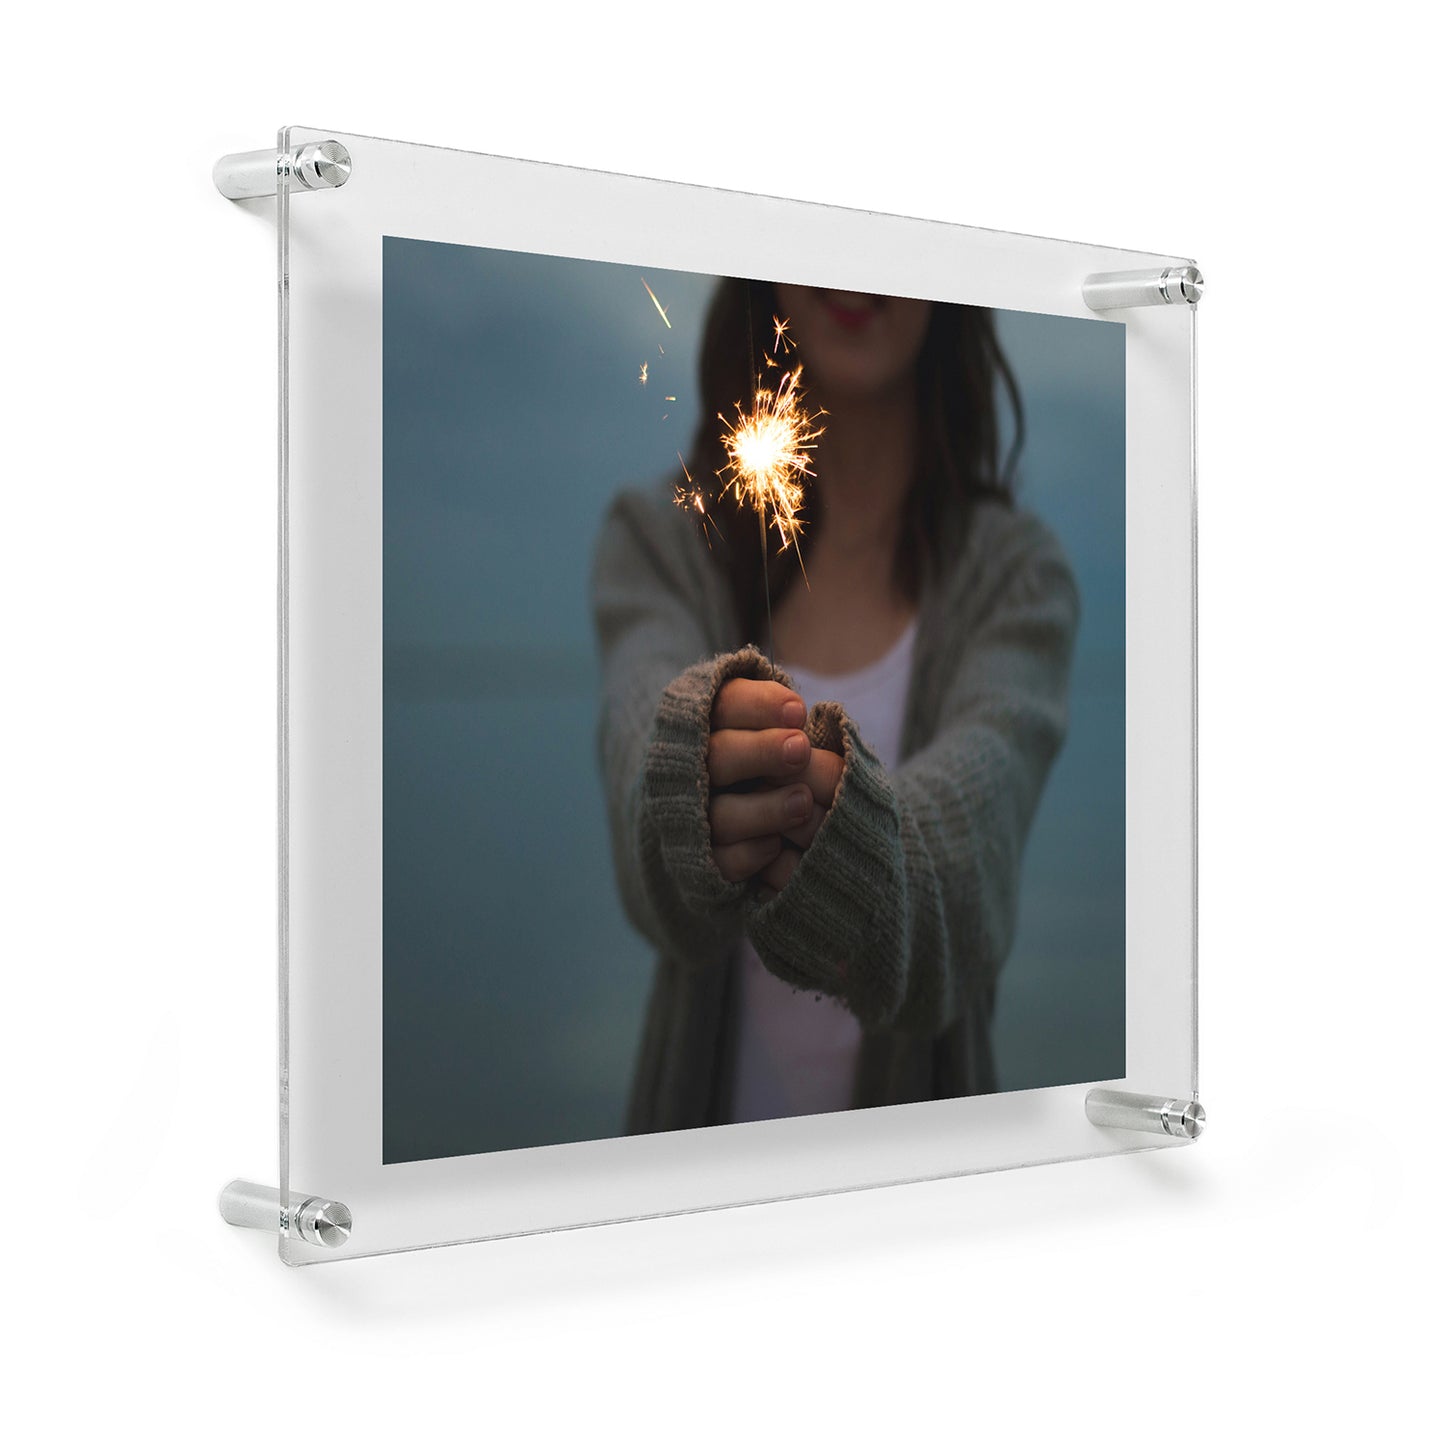 8x10" Photo Floating Acrylic Clear Picture Frame (Frame Size 12x15")